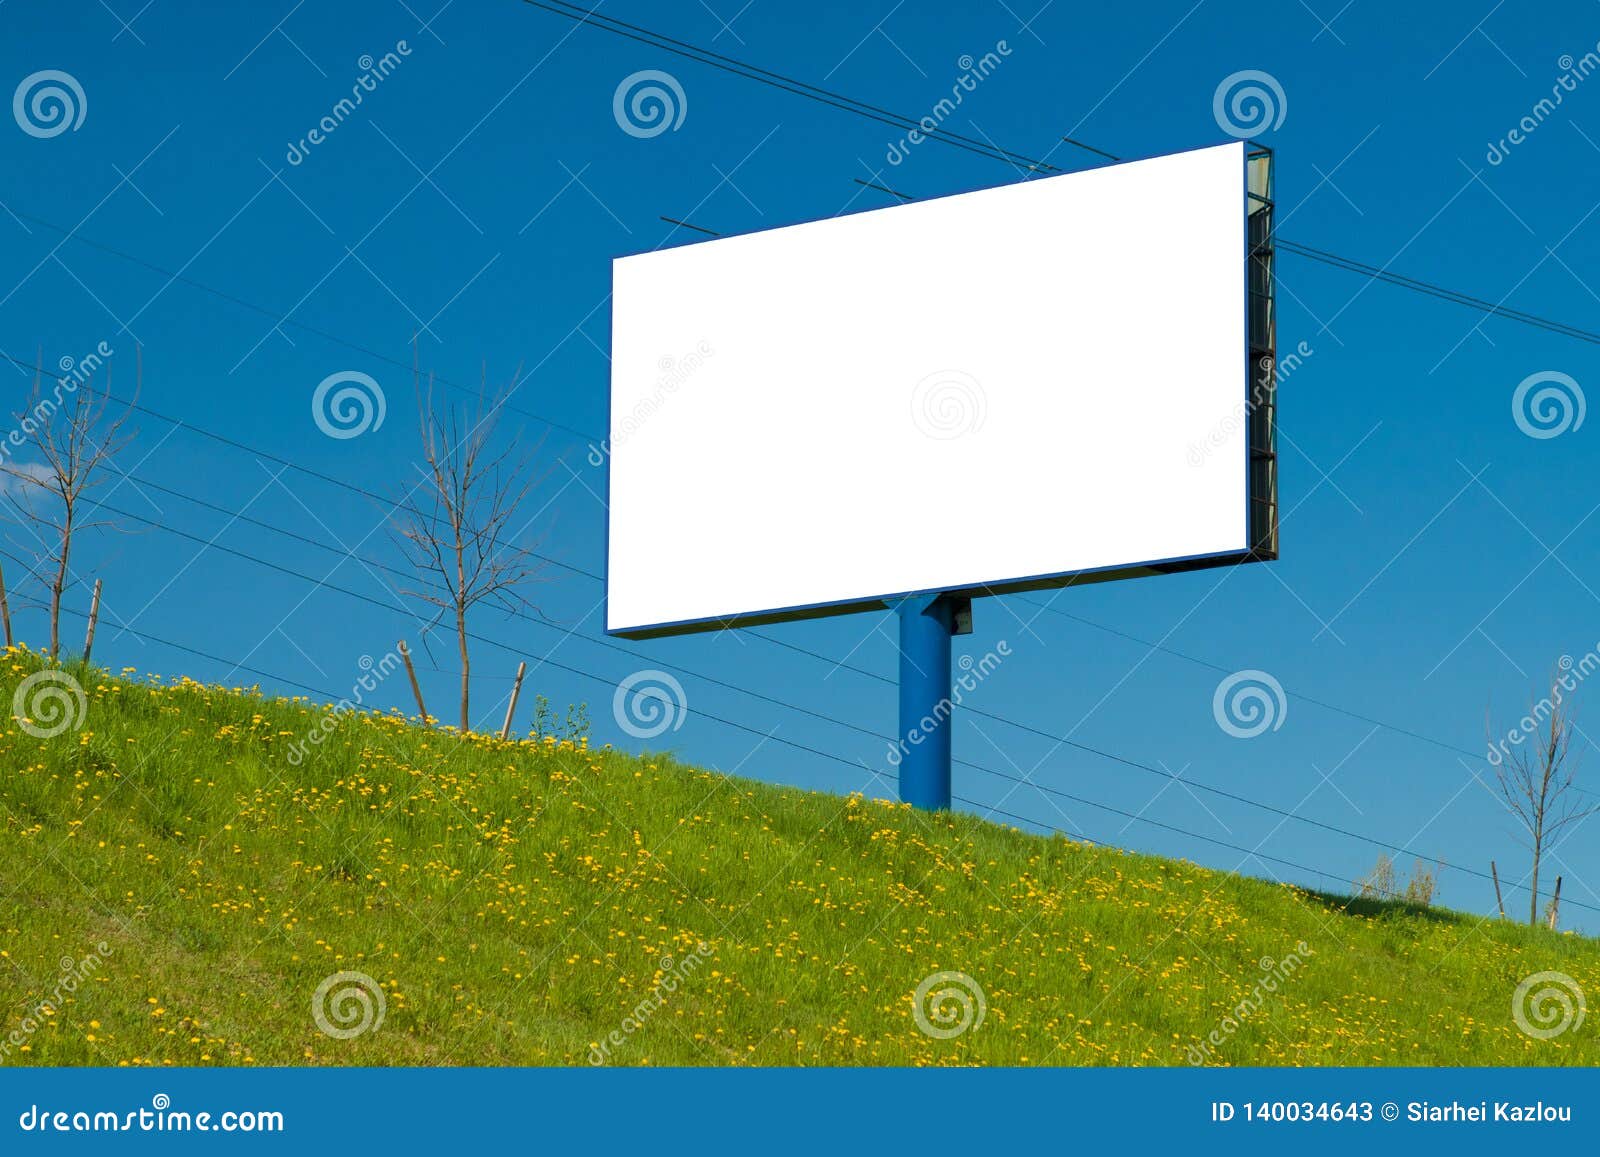 background for , billboards on city streets